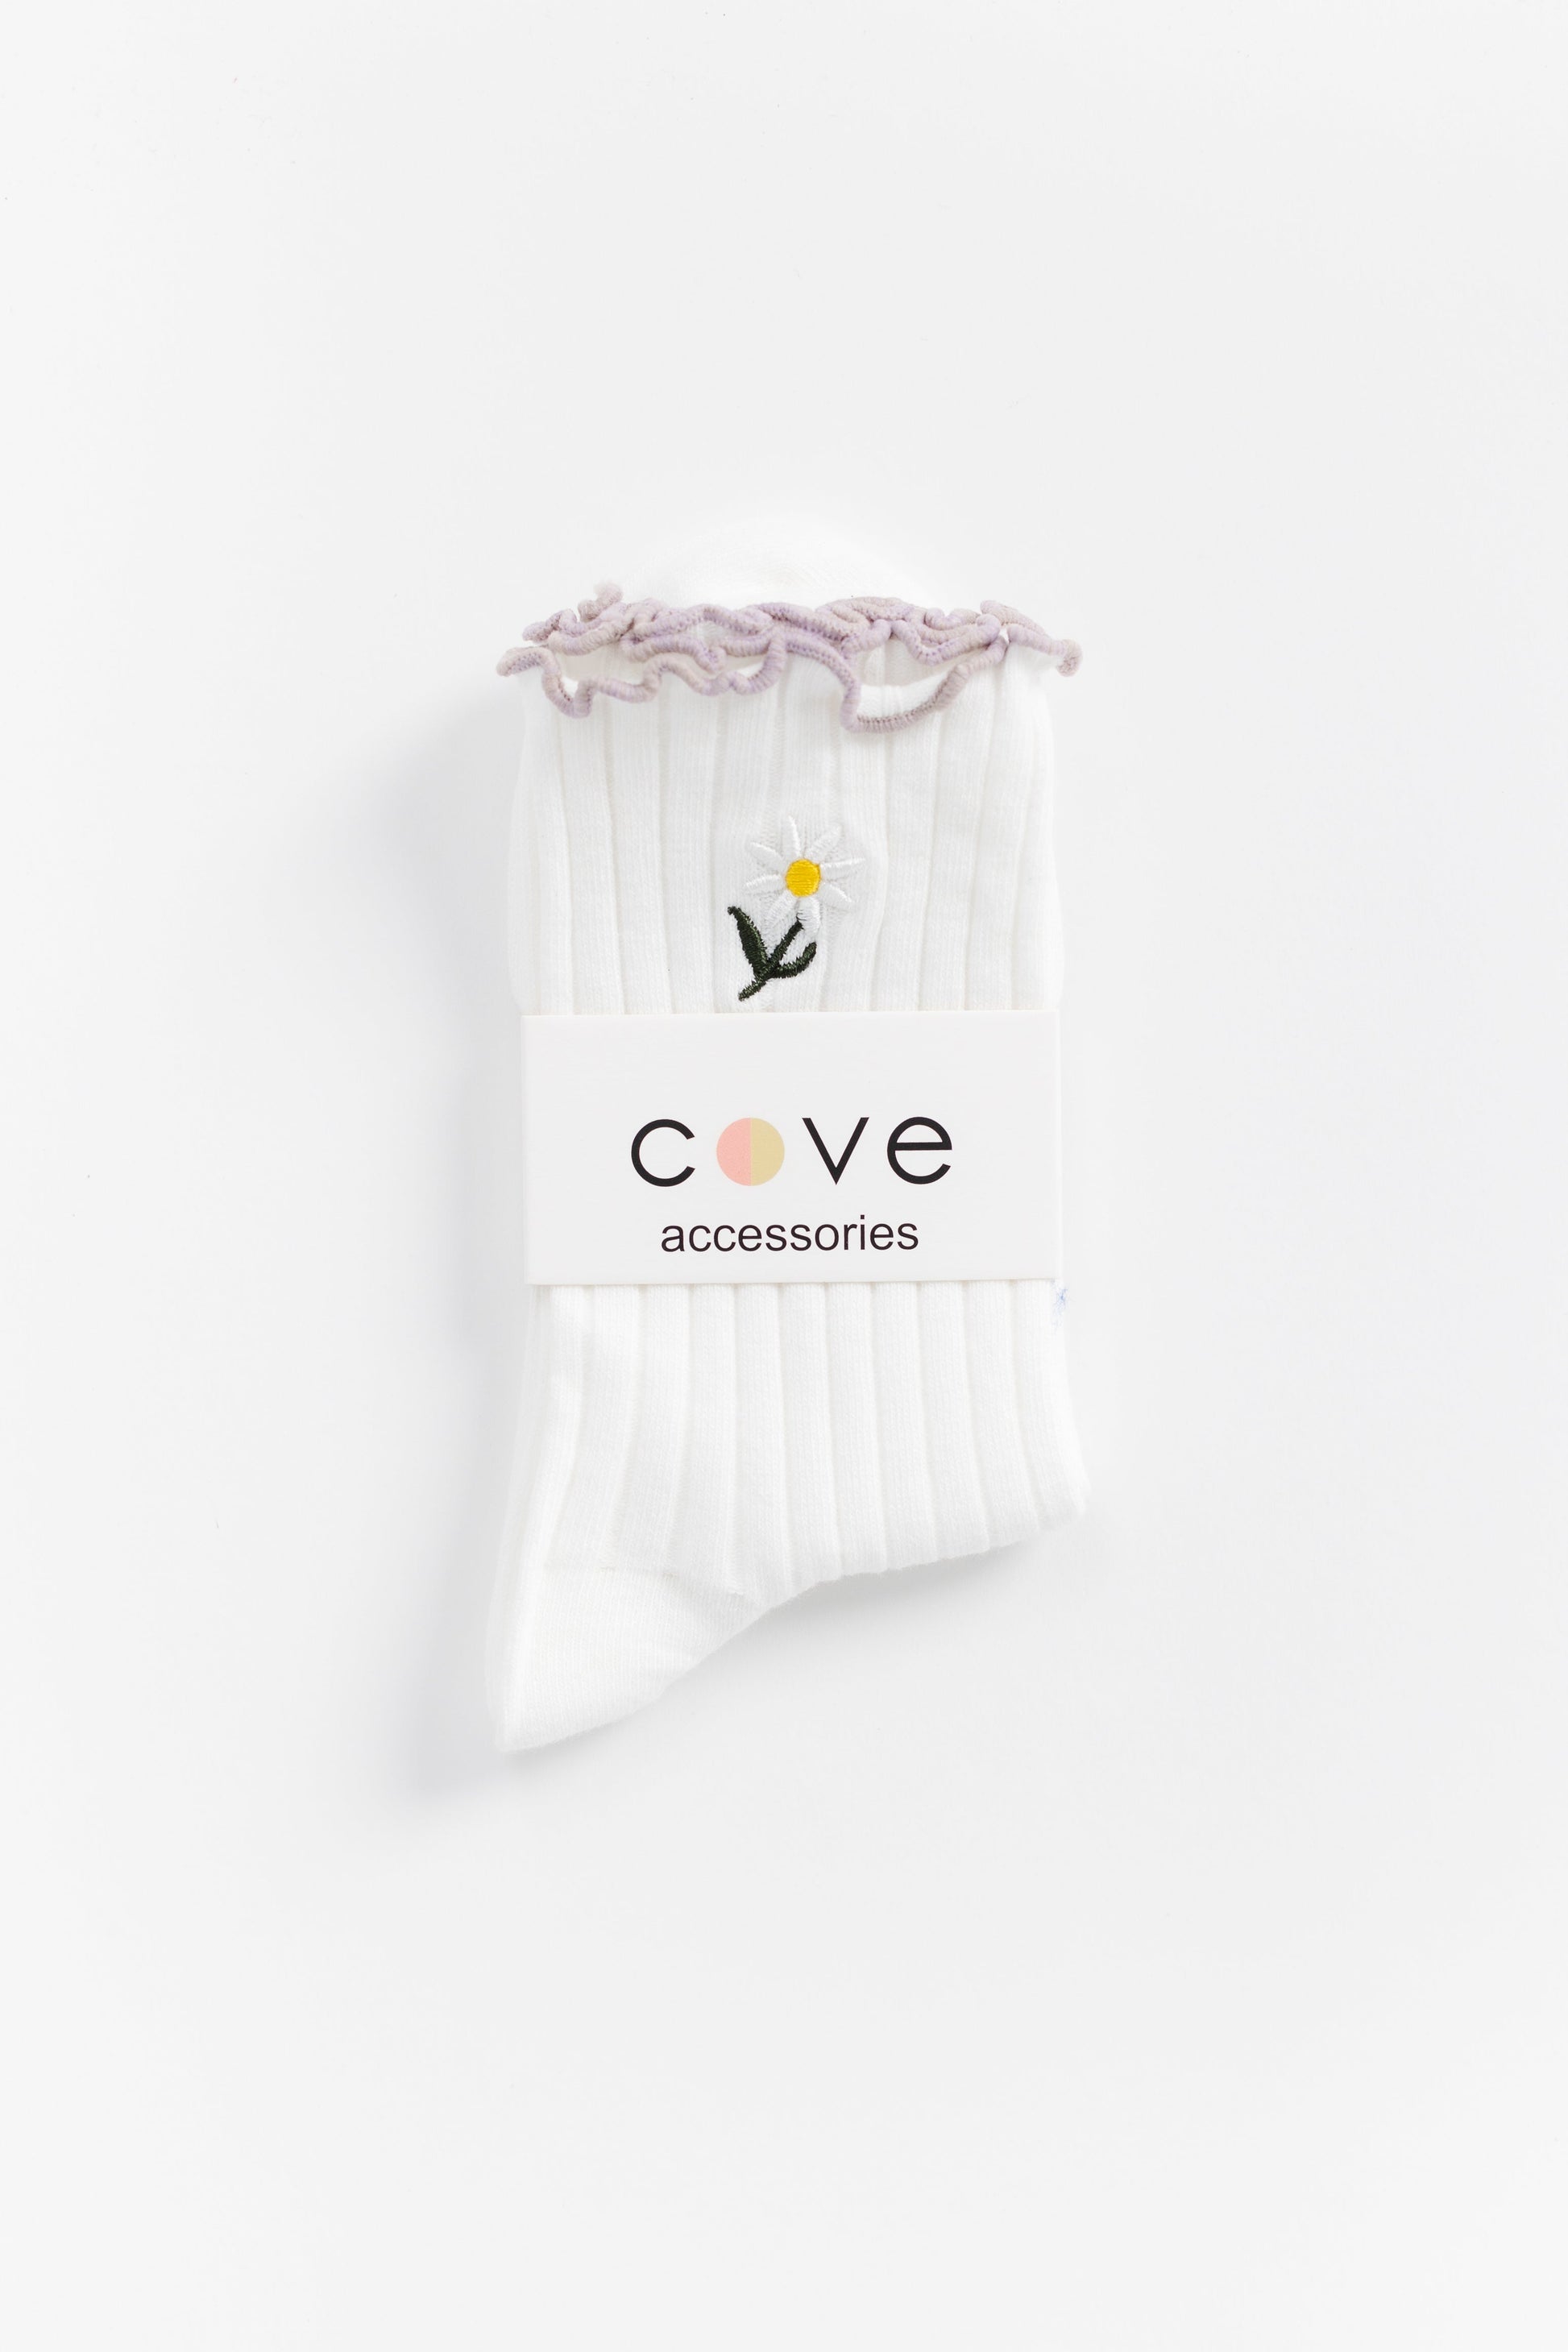 In The Valley Embroidered Sock WOMEN'S SOCKS Cove Accessories White OS 